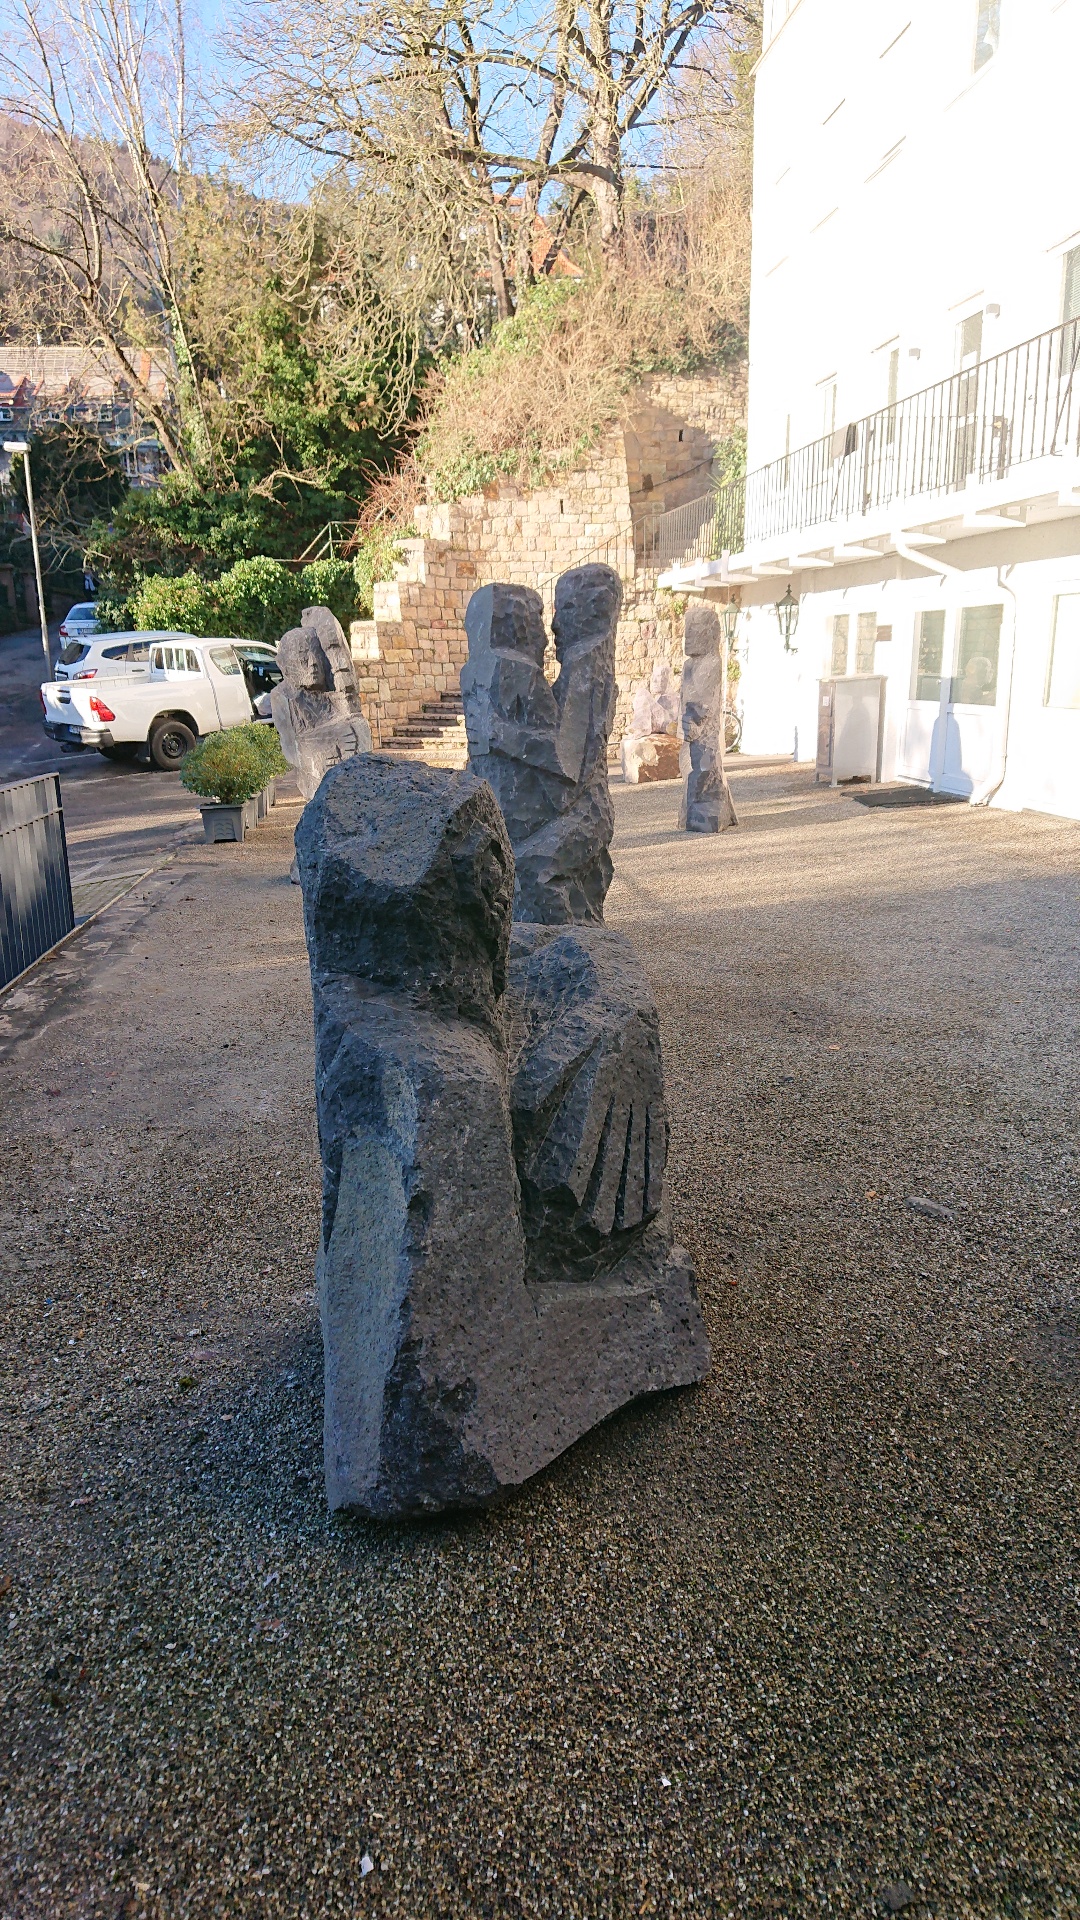 Group of sculptures